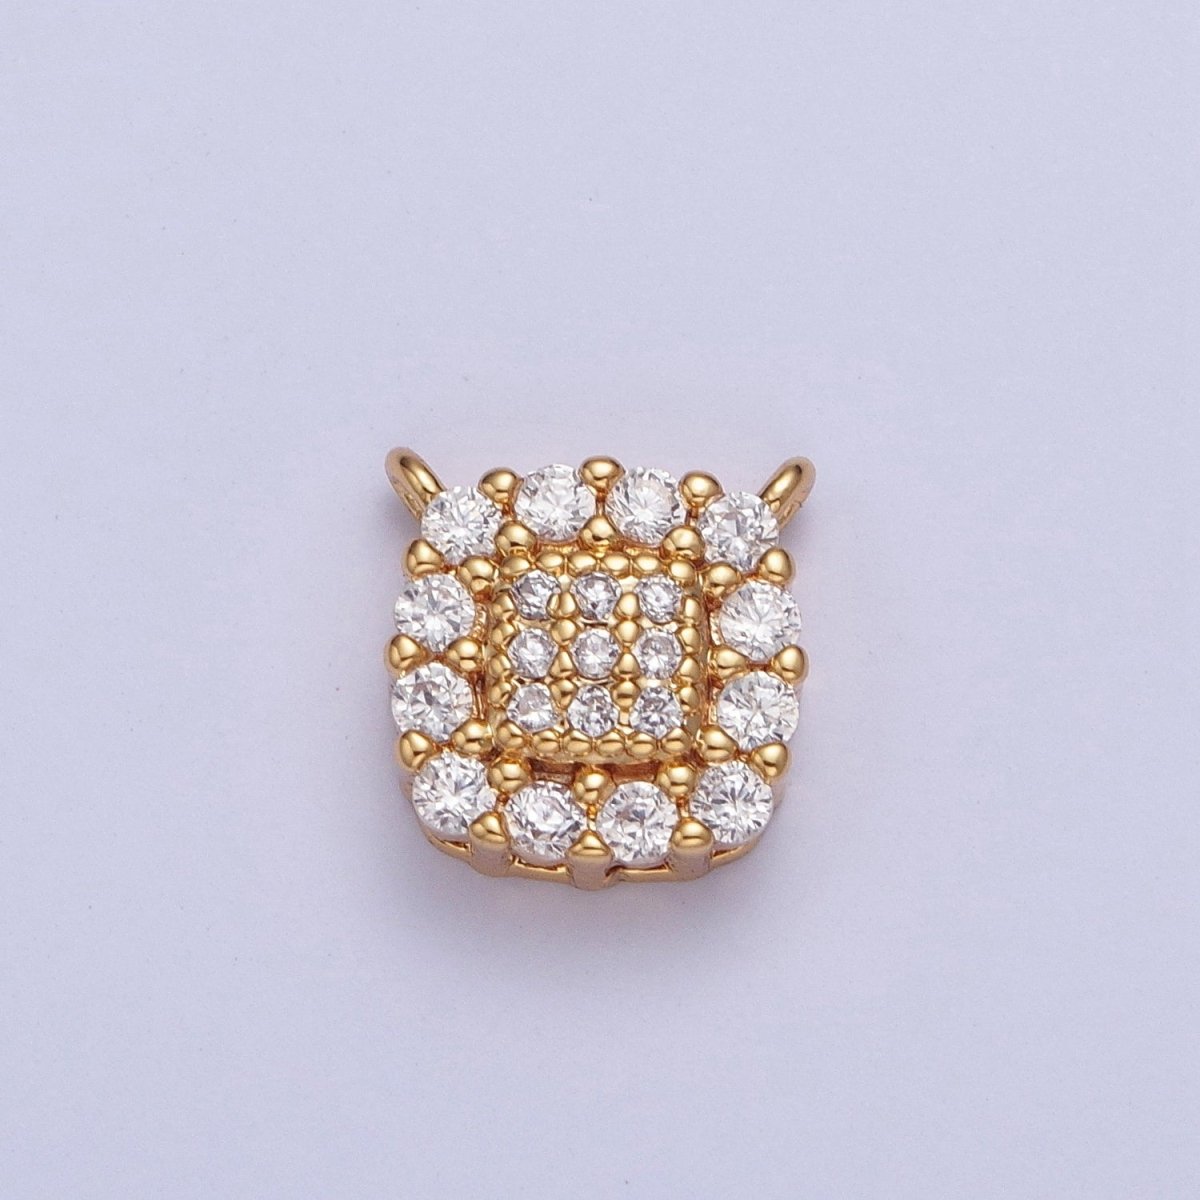 24K Gold Filled Micro Pave Cubic Zirconia Square Connector Charm For Jewelry Making F-605 - DLUXCA